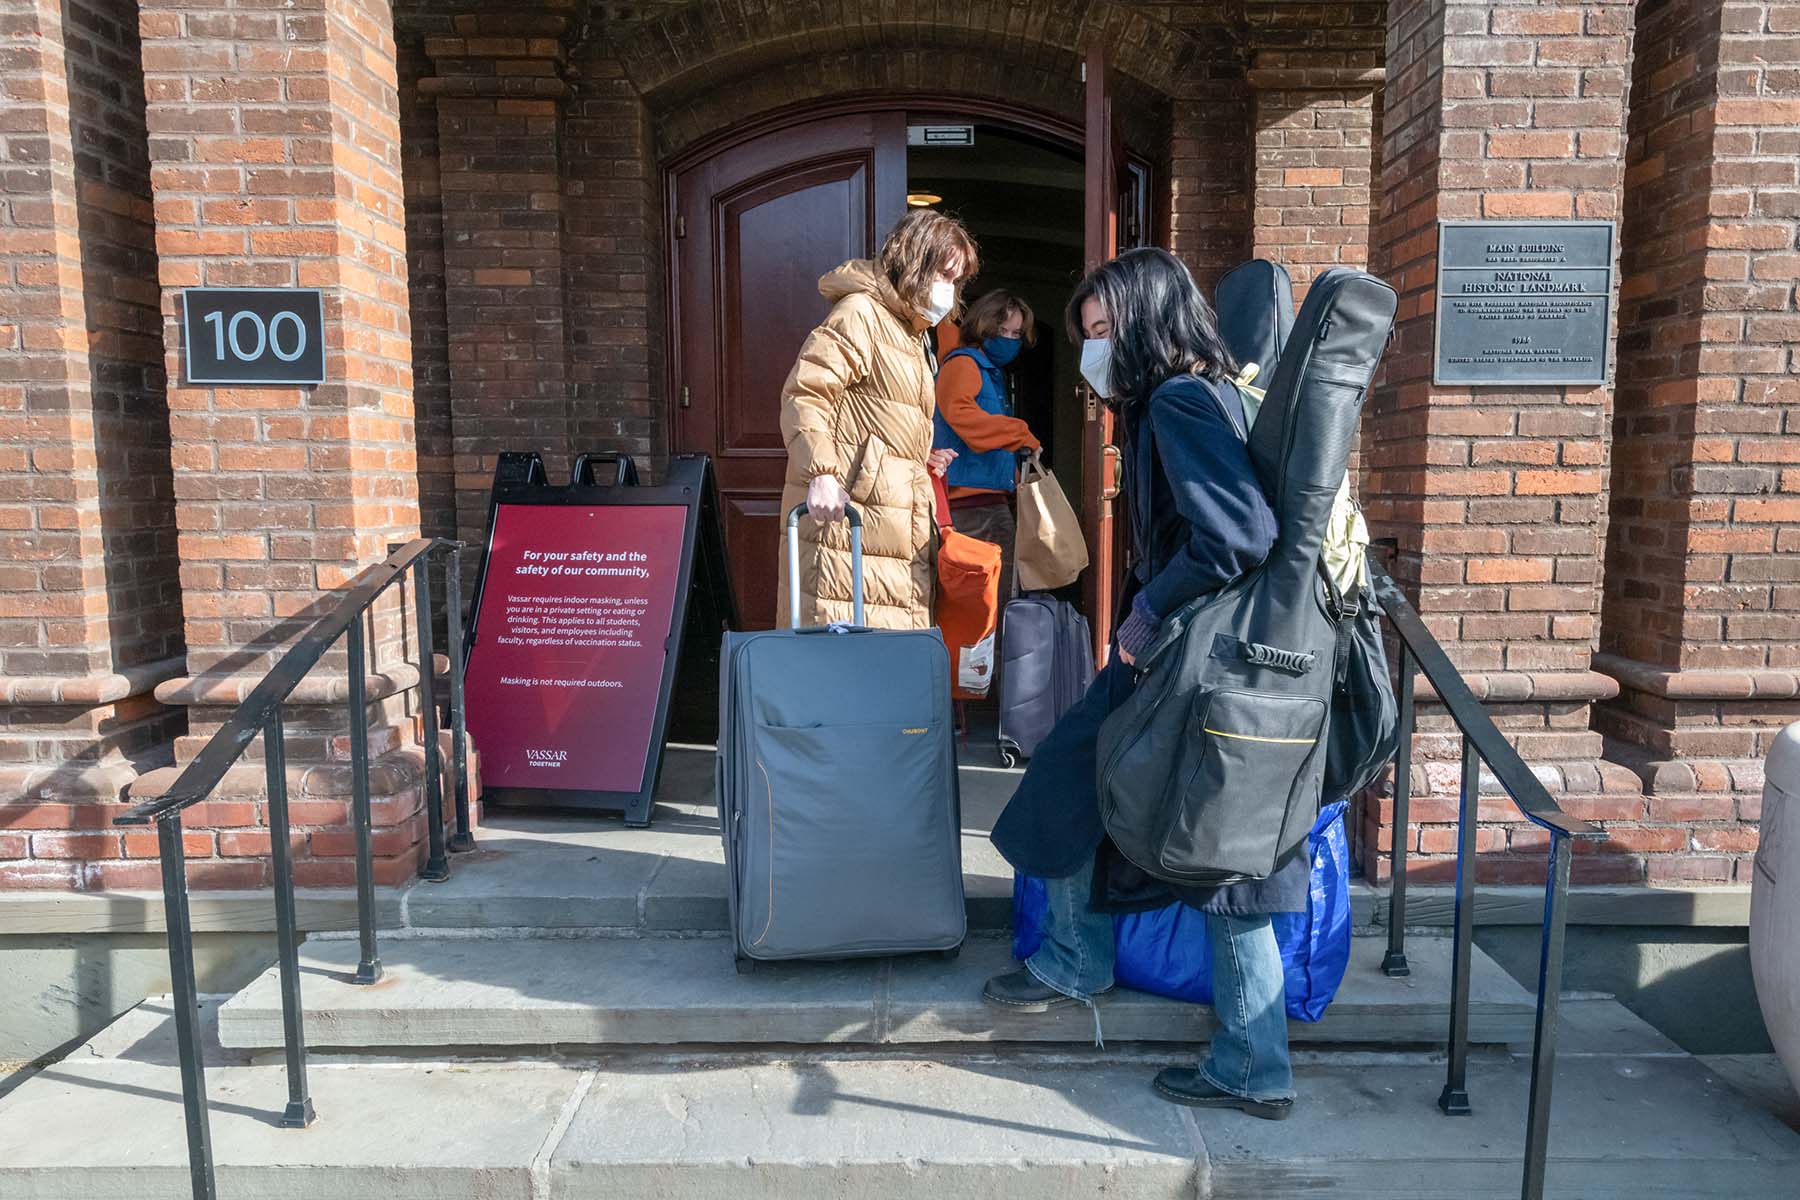 As the Spring Semester arrived, students were taking precautions and following new protocols as they moved back into campus housing. 